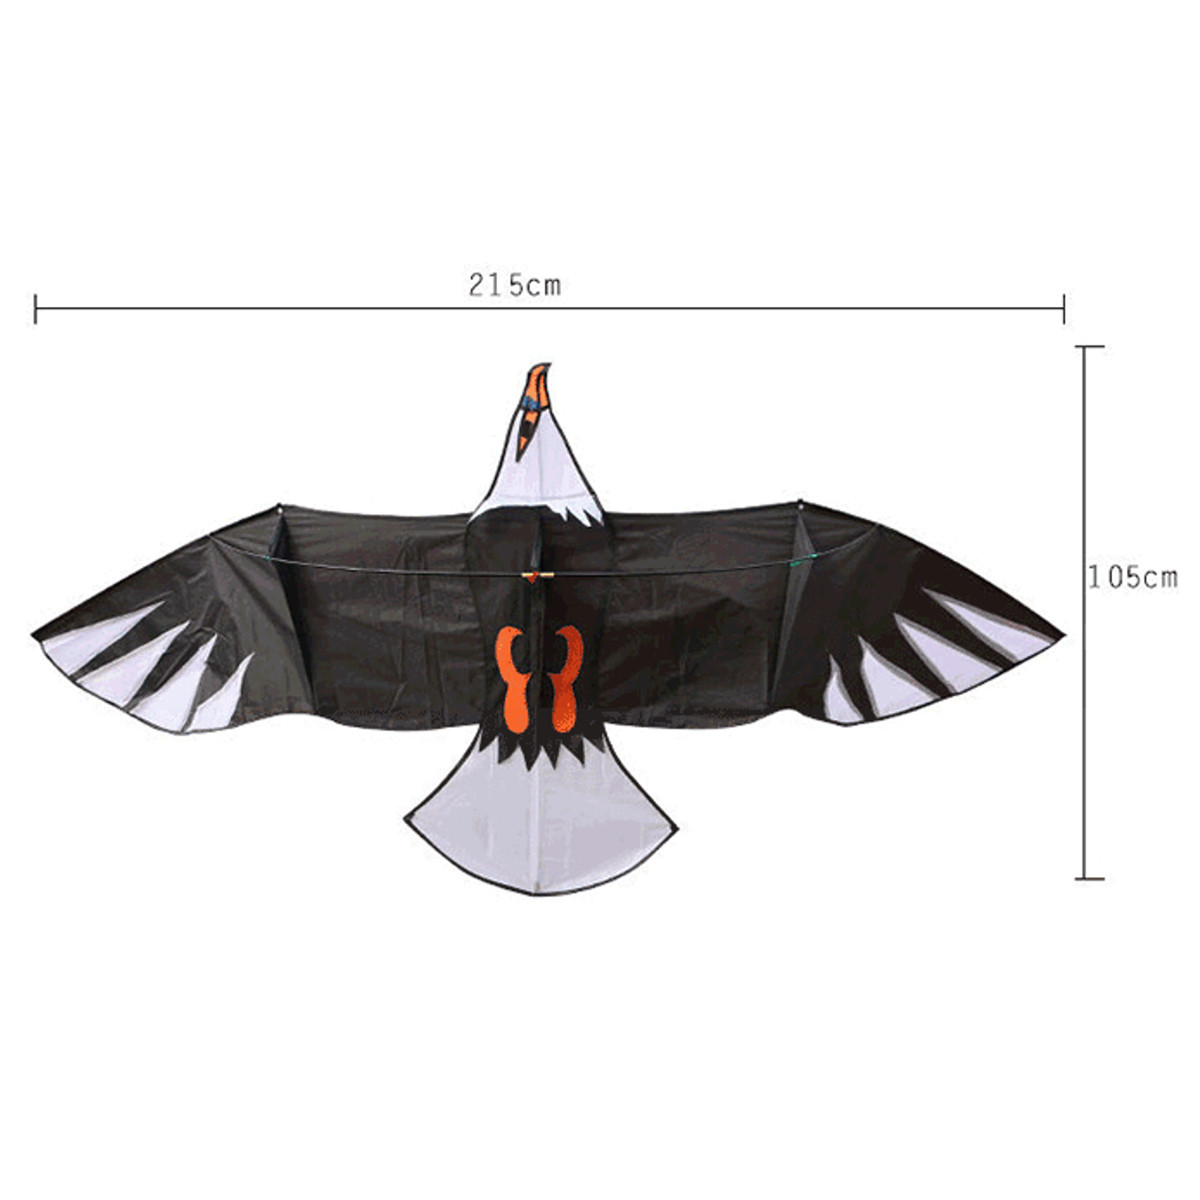 High-Quality-3D-Eagle-Kite-single-line-stunt-kite-Outdoor-Sports-Toys-for-kids-1130507-4